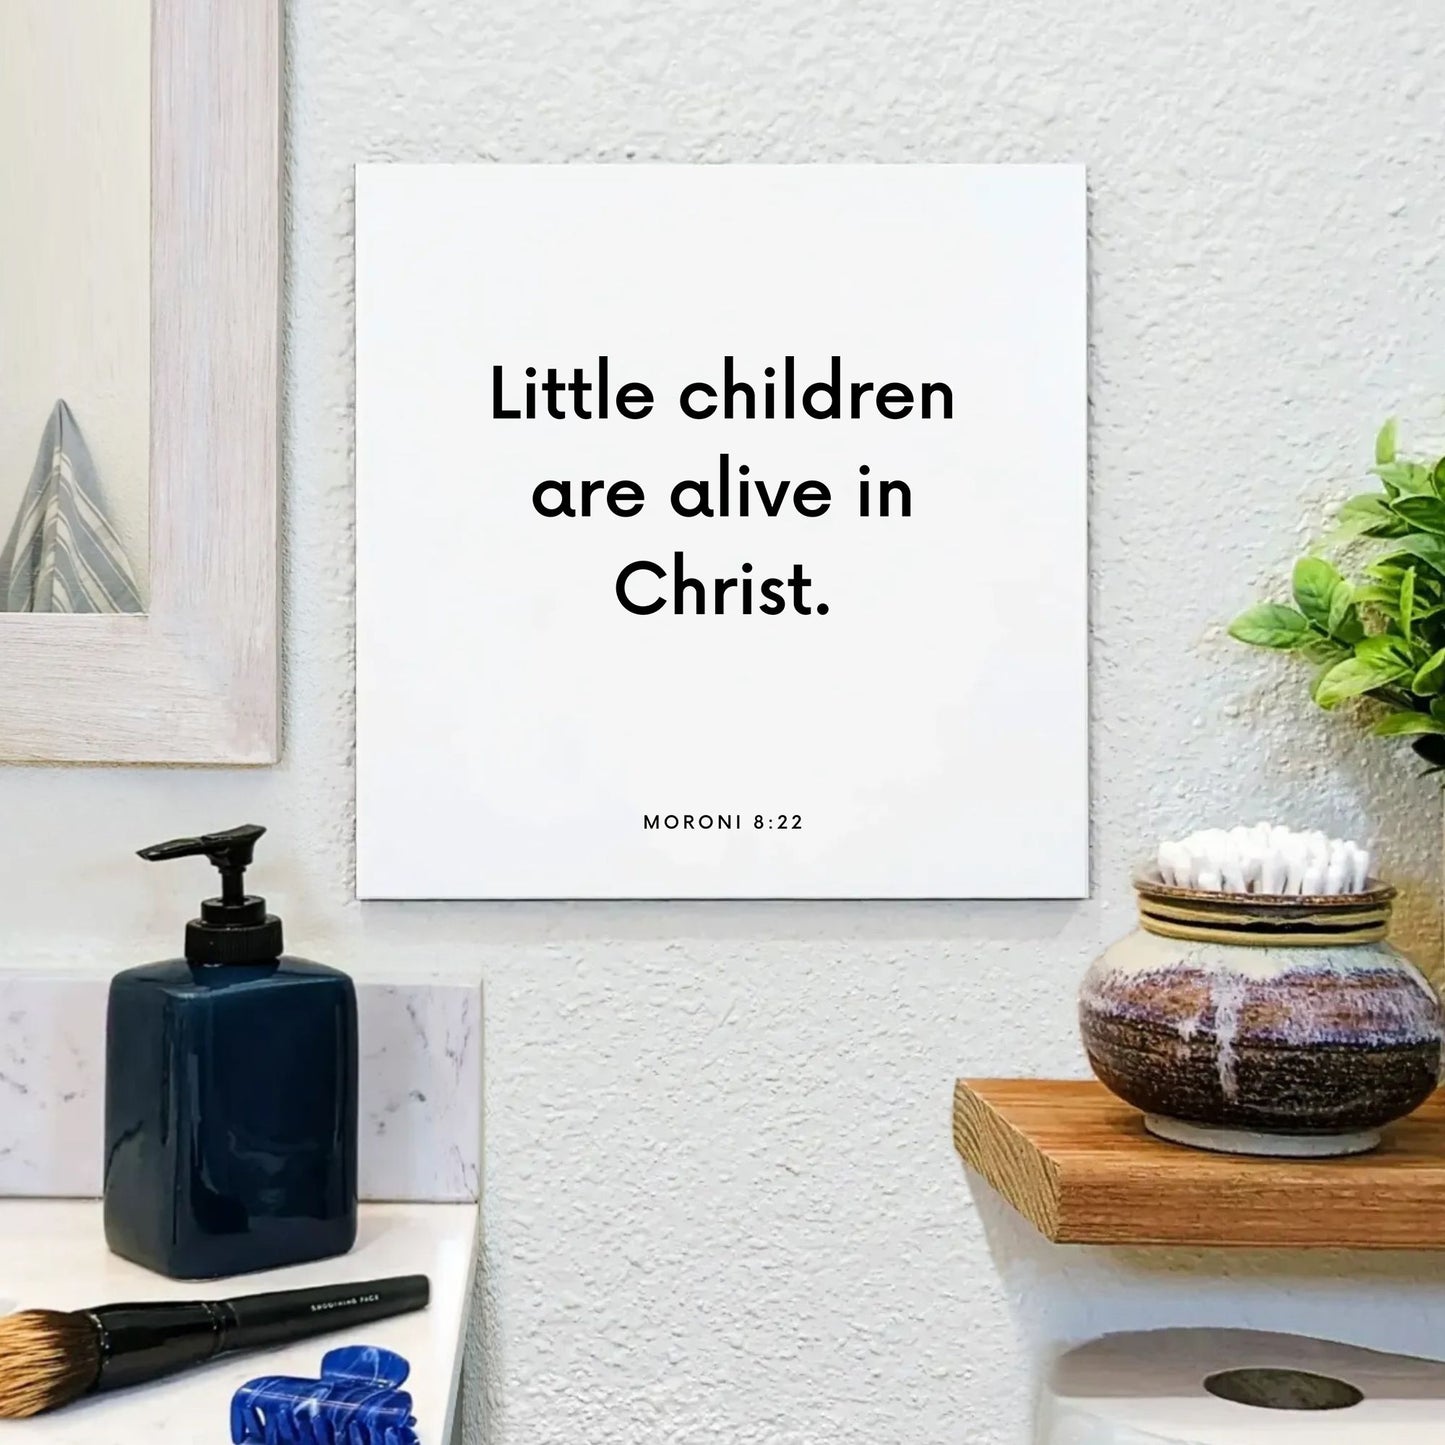 Bathroom mouting of the scripture tile for Moroni 8:22 - "Little children are alive in Christ"